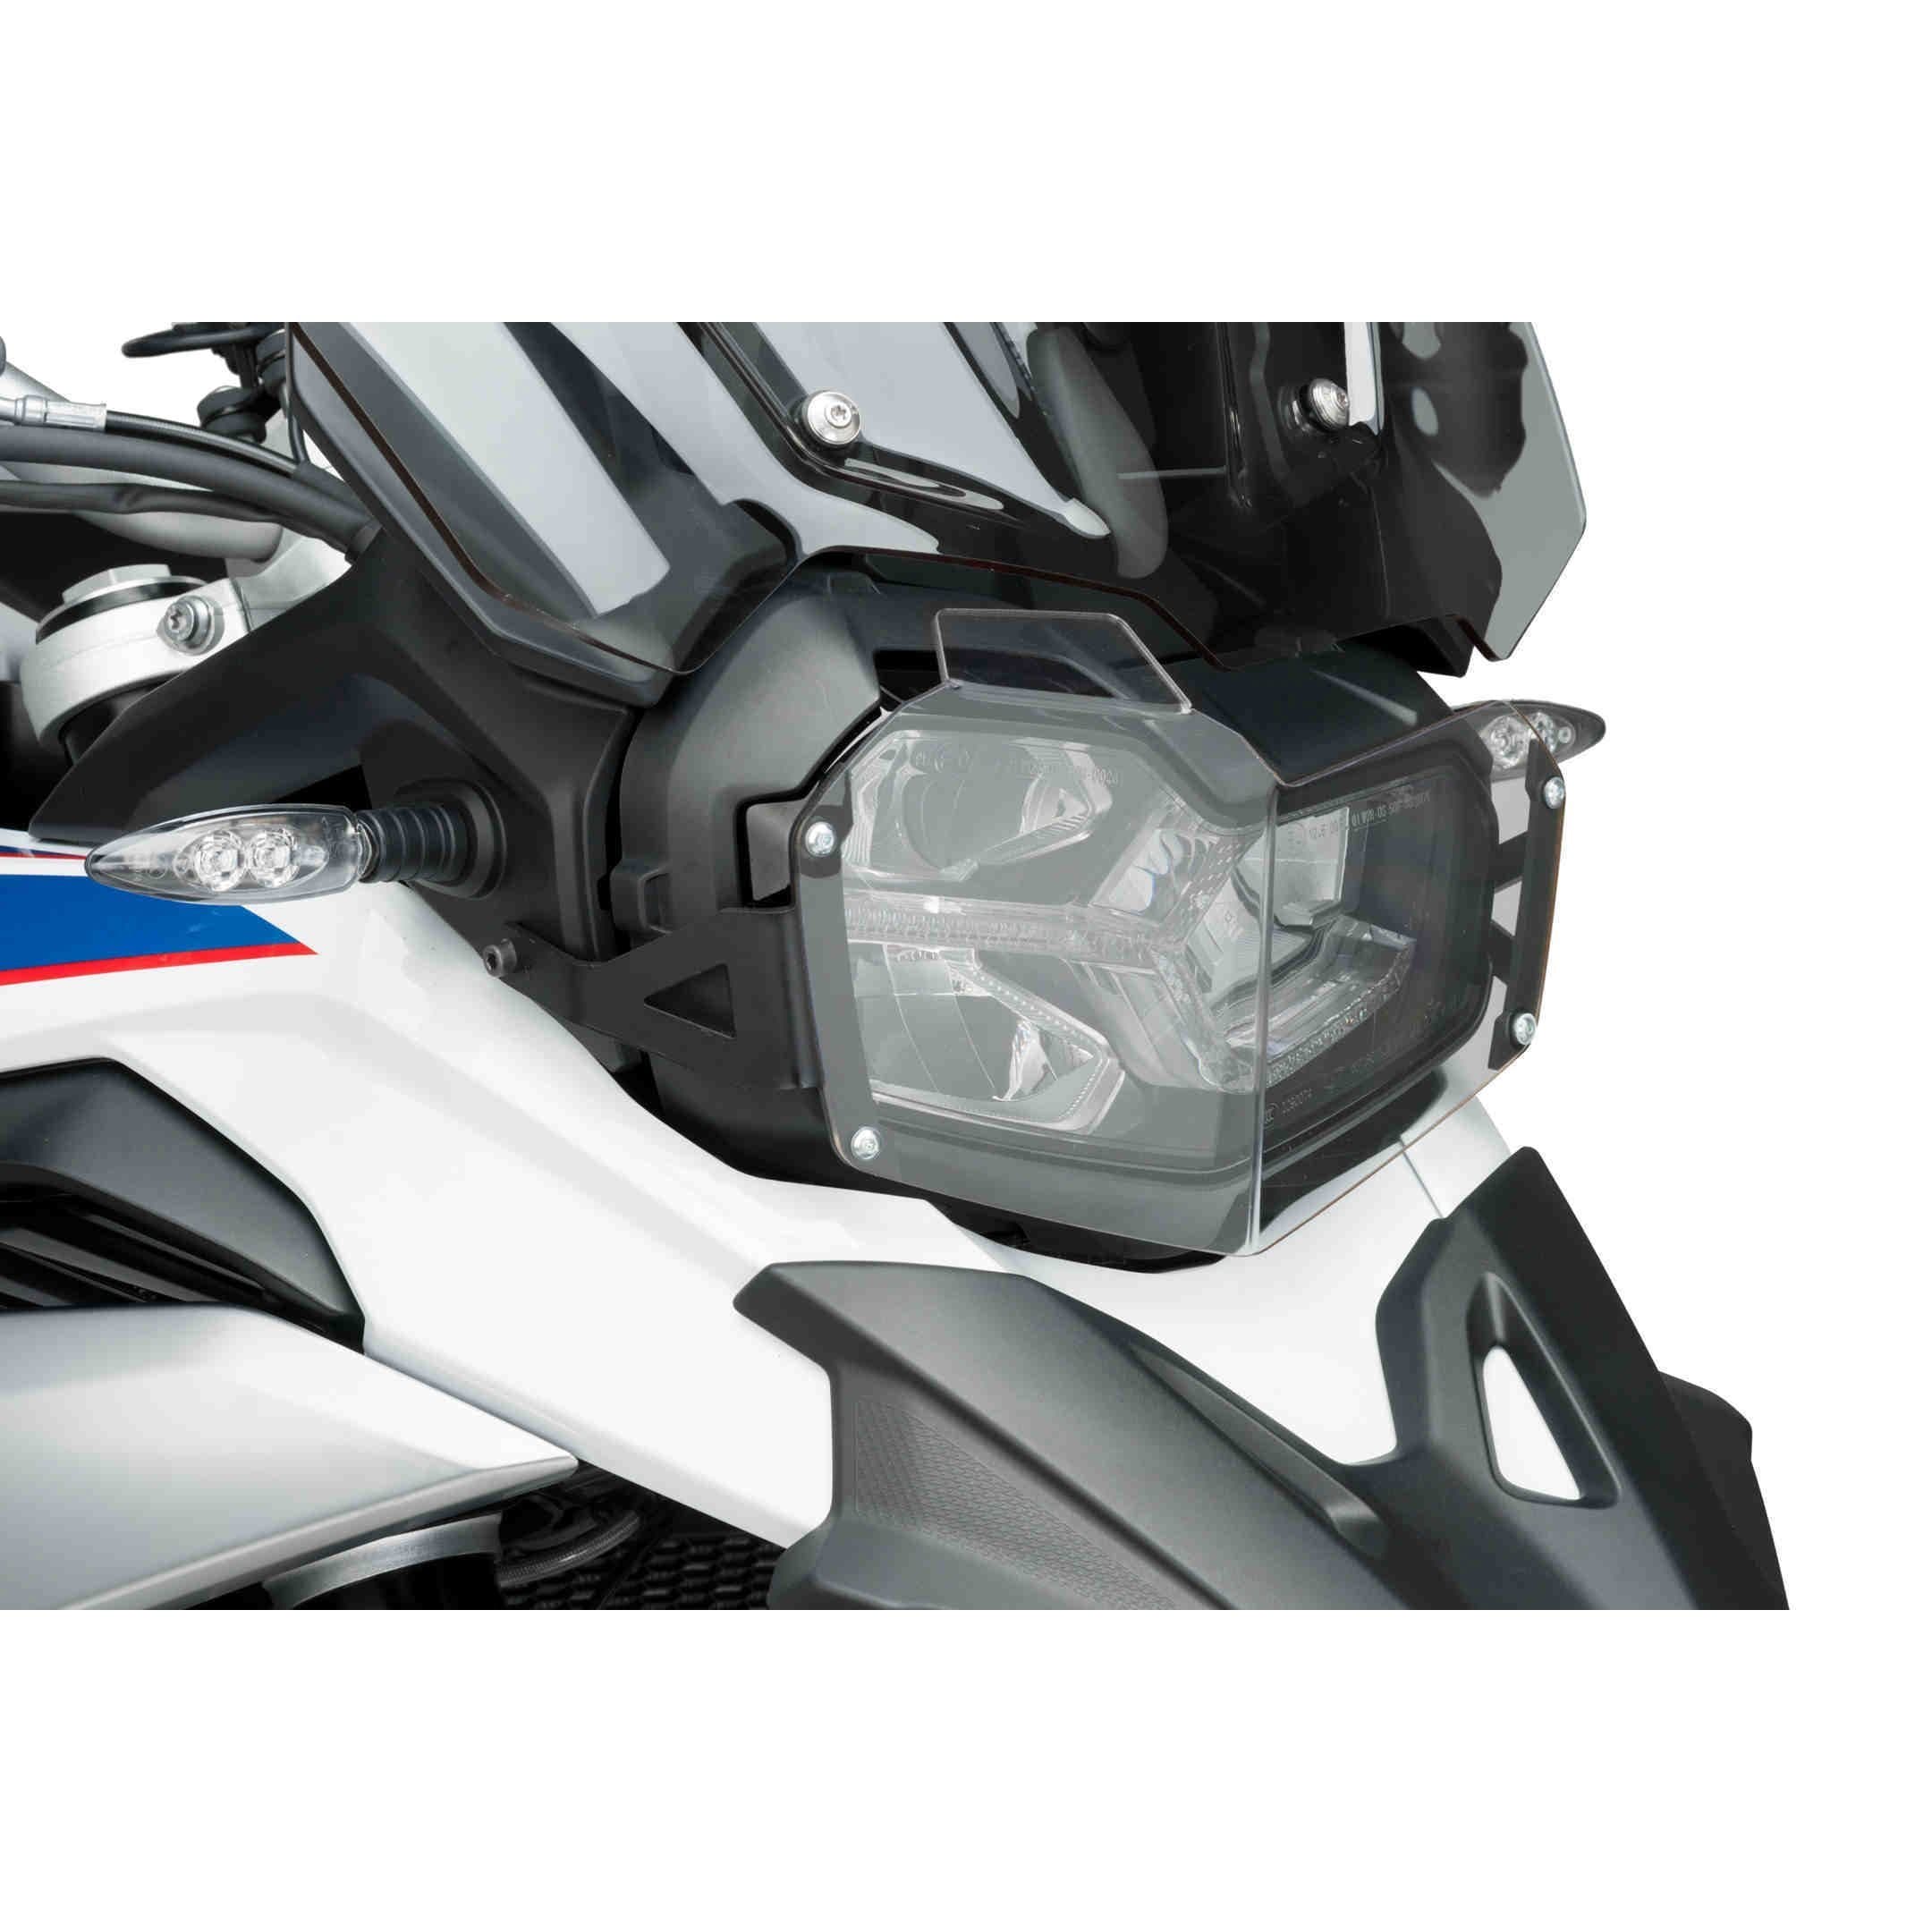 Puig Polycarbonate Headlight Guard | Clear | BMW F850 GS 2018>Current-M9762W-Headlight Protection-Pyramid Motorcycle Accessories